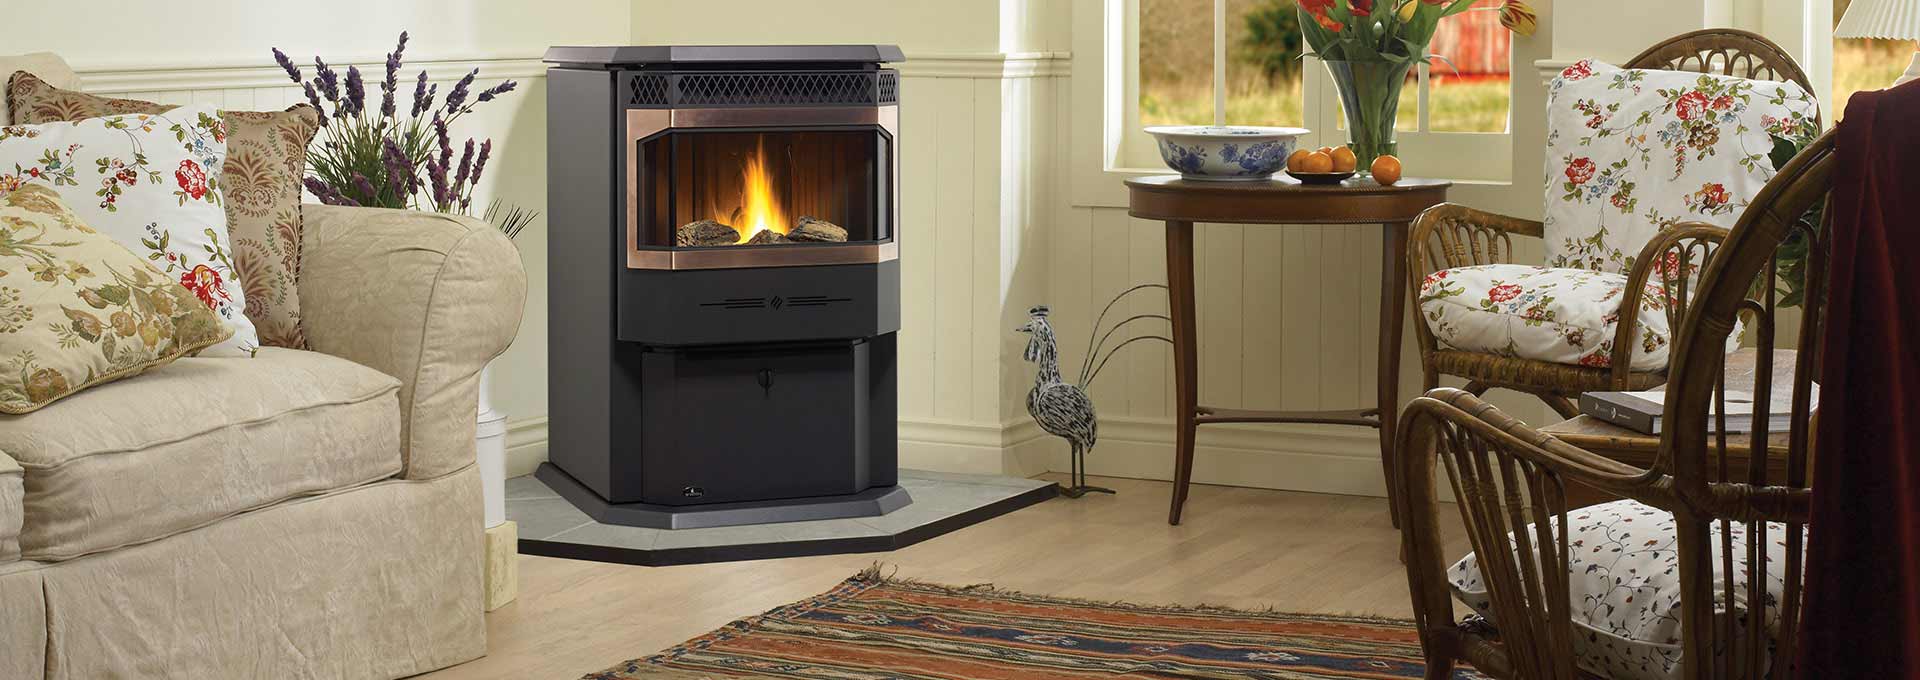 Regency Greenfire GF55 Pellet Stove in black with fire in den with couch and two chairs